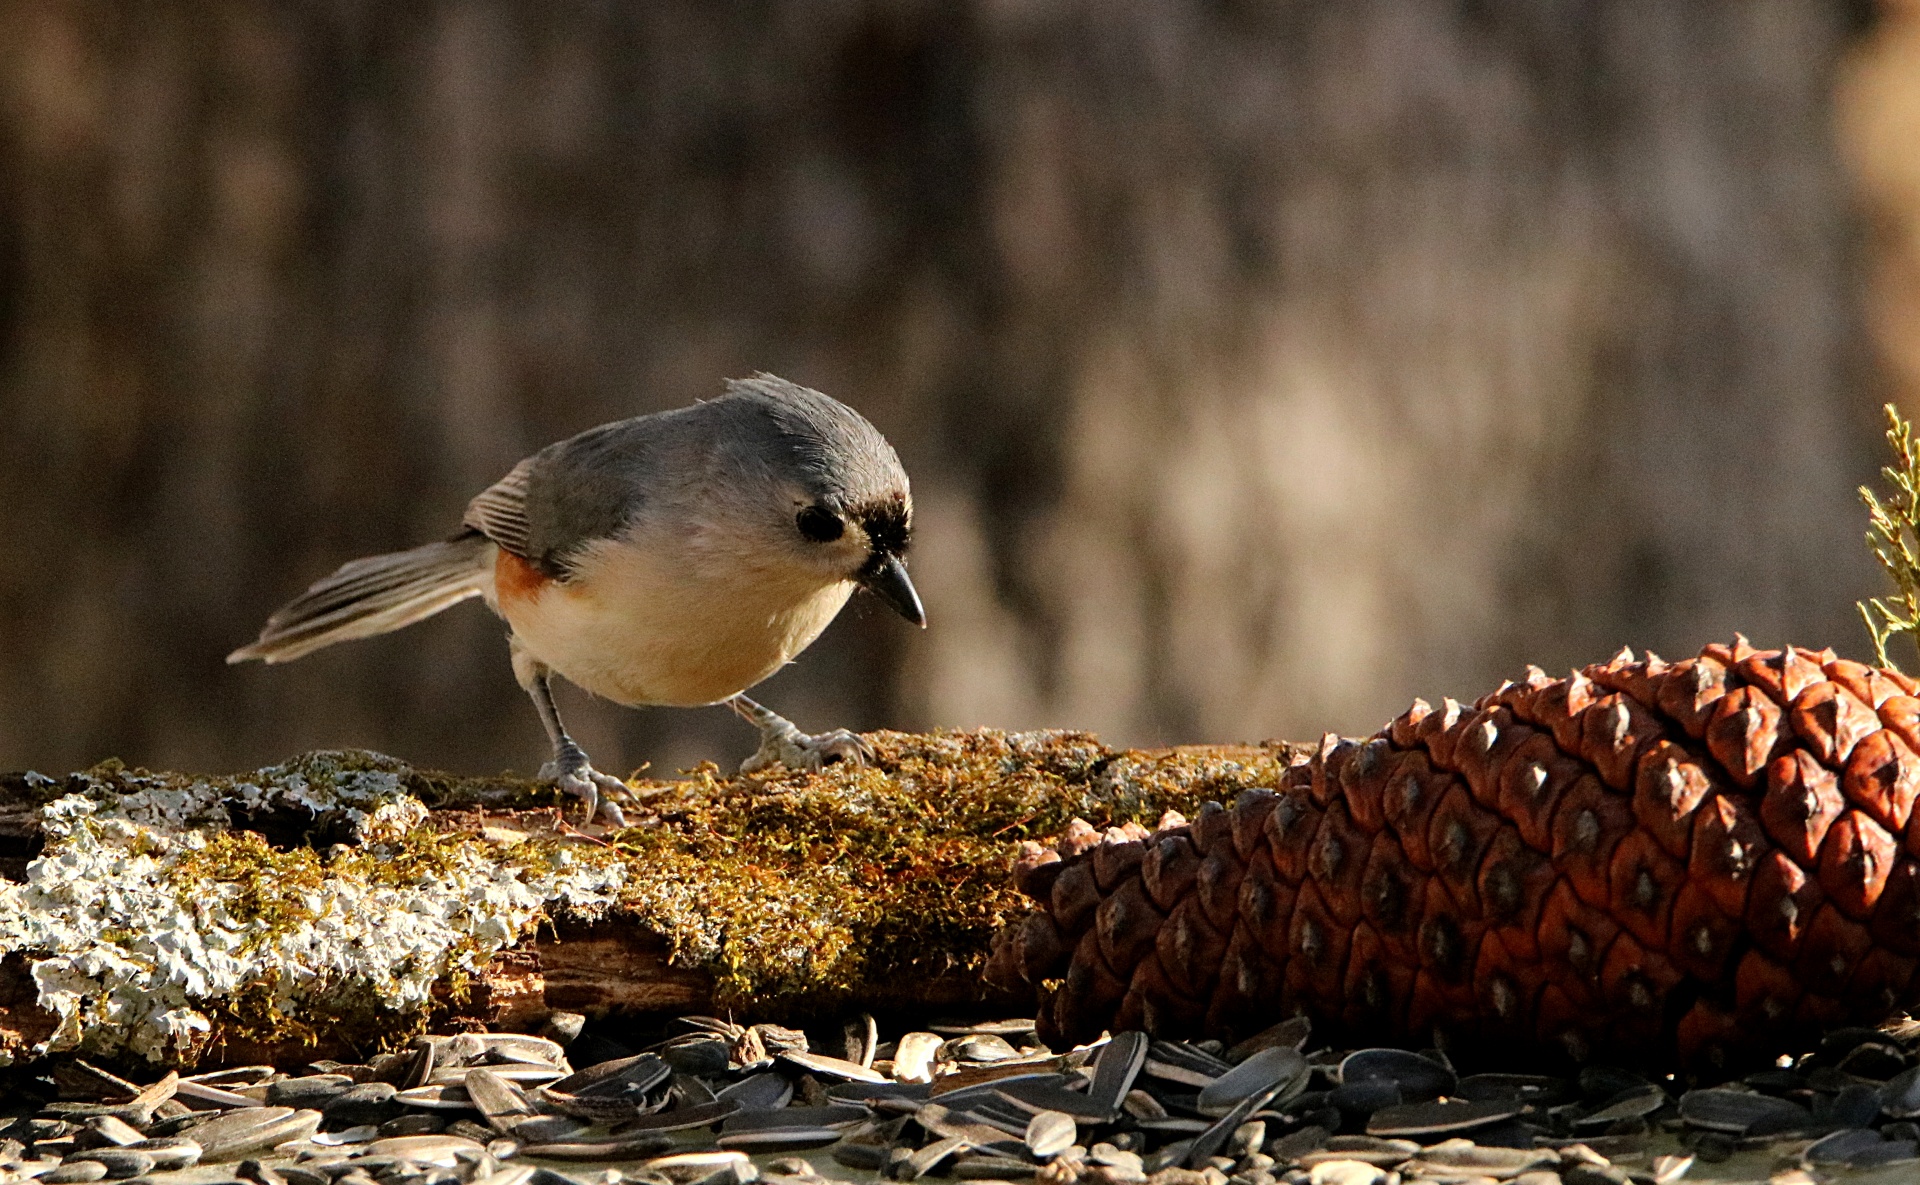 Close-up of a cute little tufted titmouse as he stands on a moss and lichen covered tree branch, looking down at sunflower seeds and a pine cone, in fall.